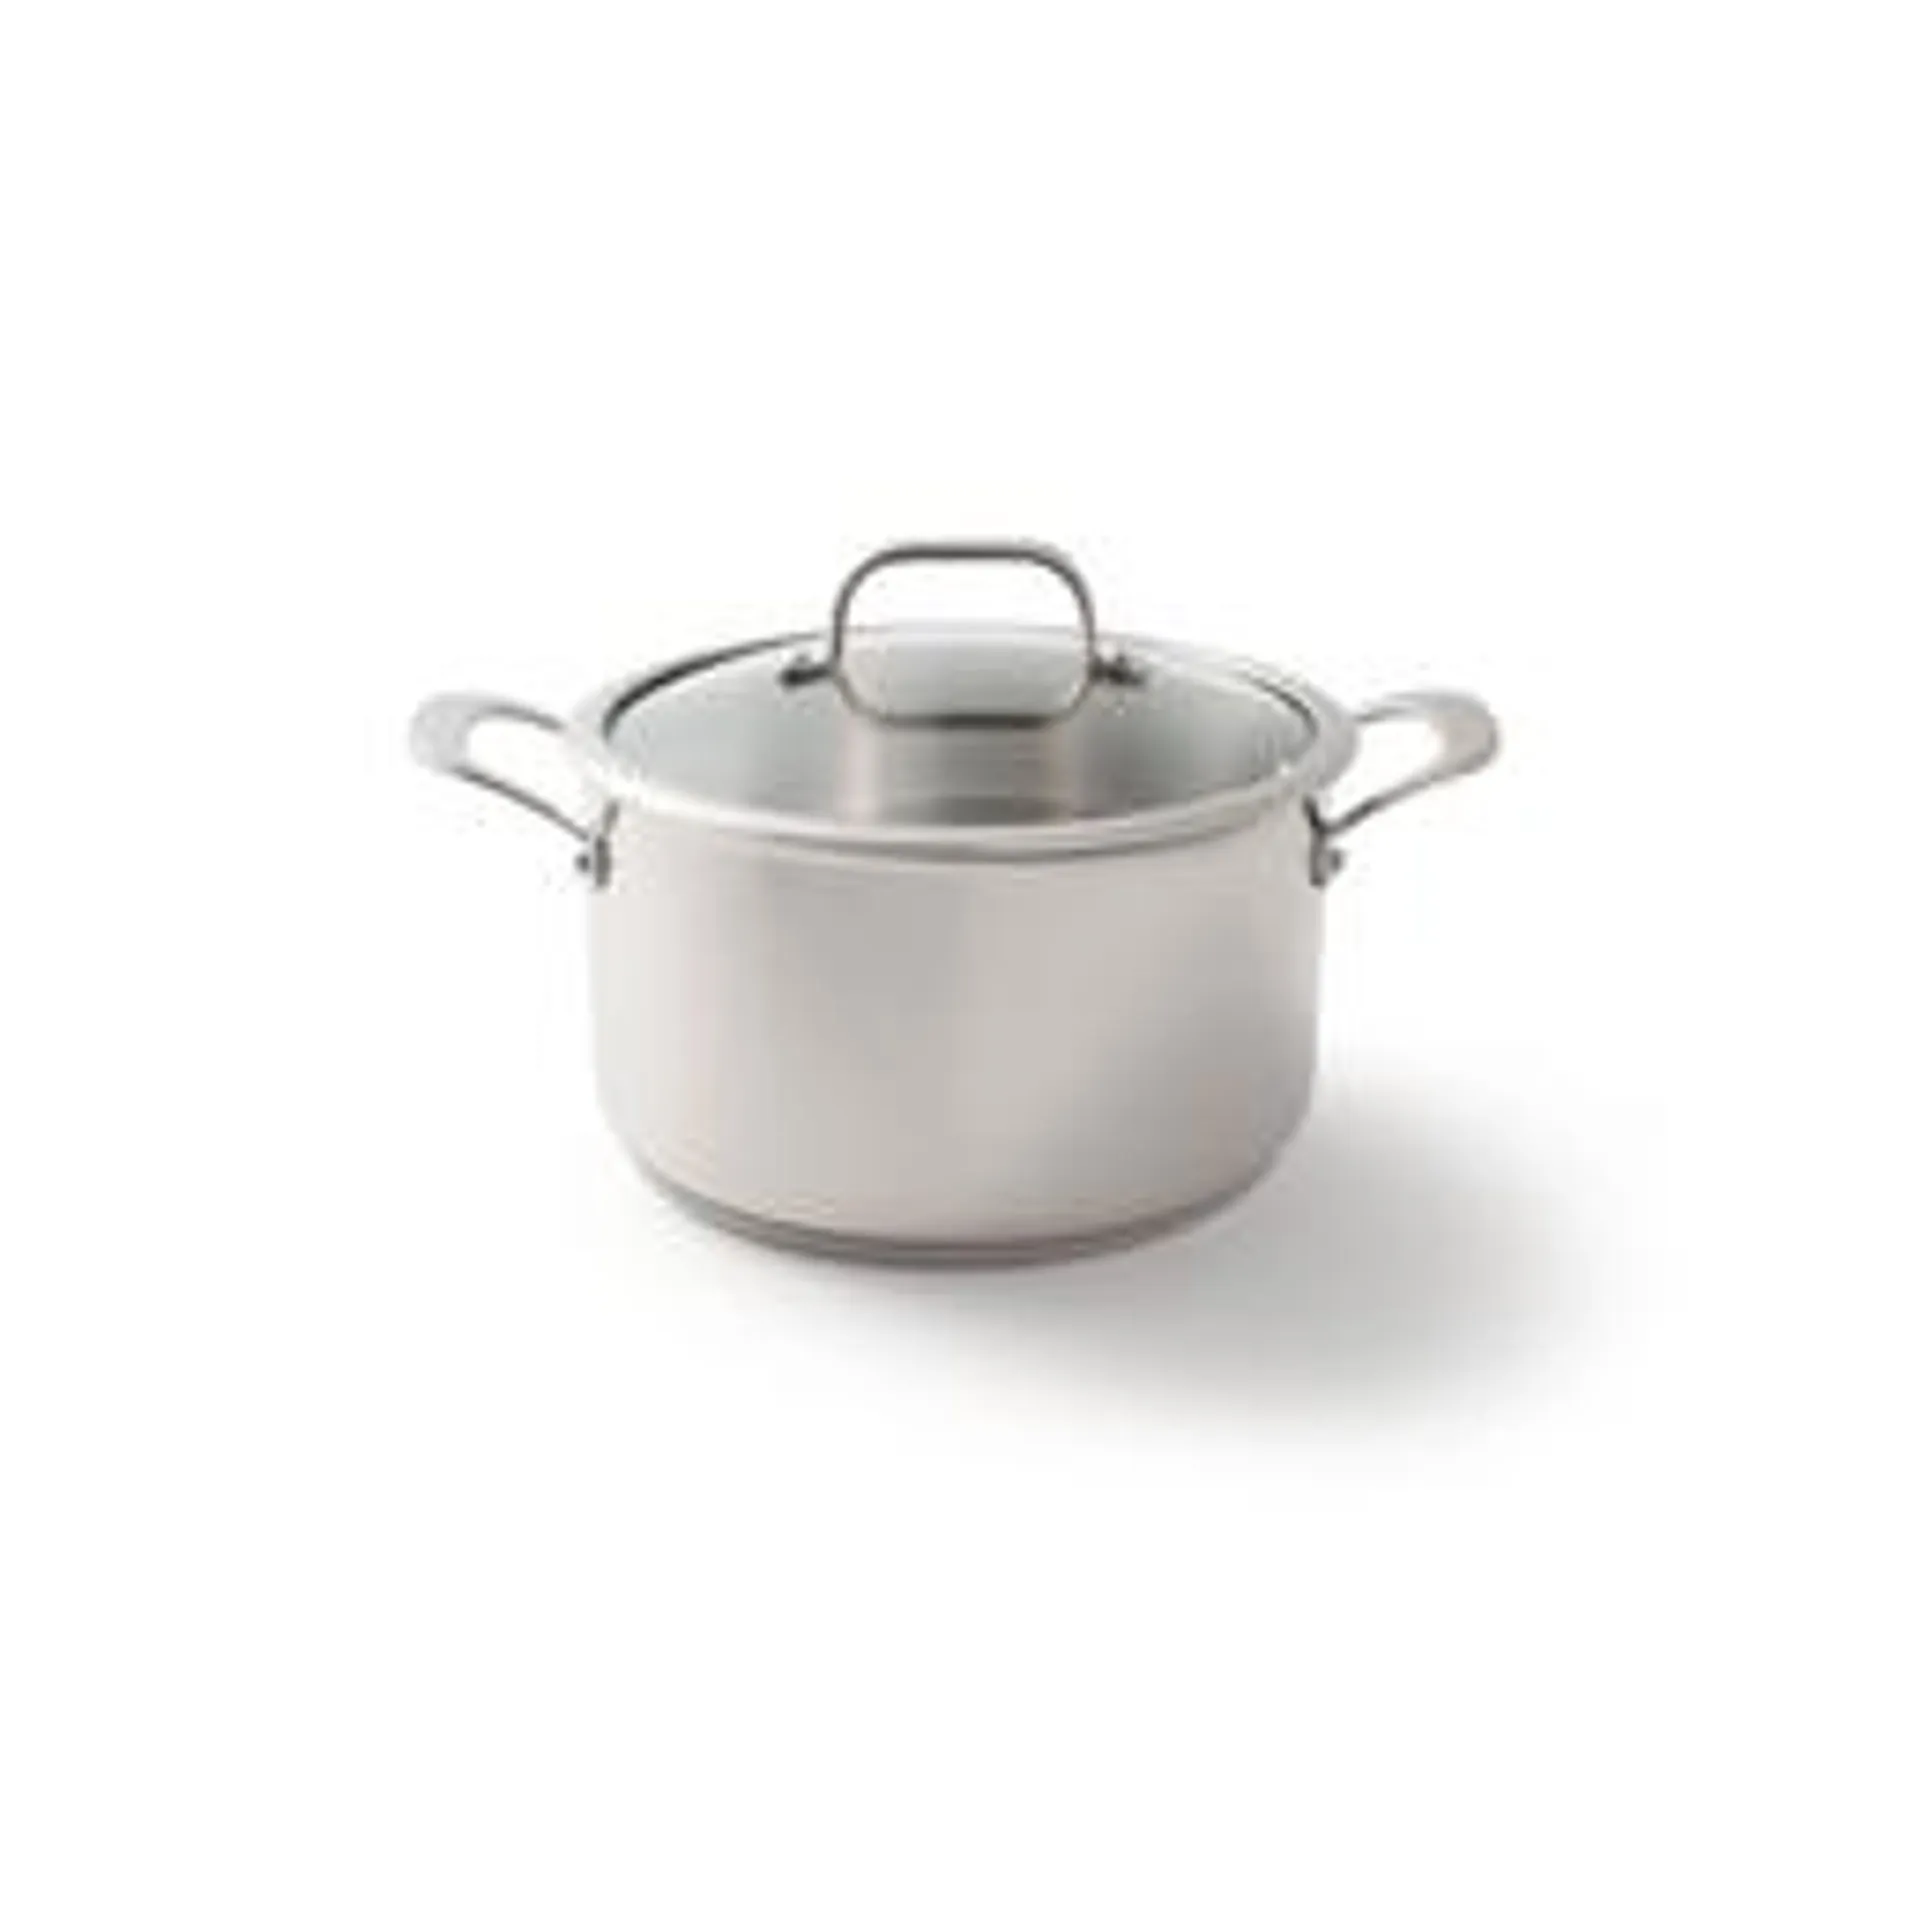 Stevens Titan Stainless Steel Casserole with Lid, 24cm